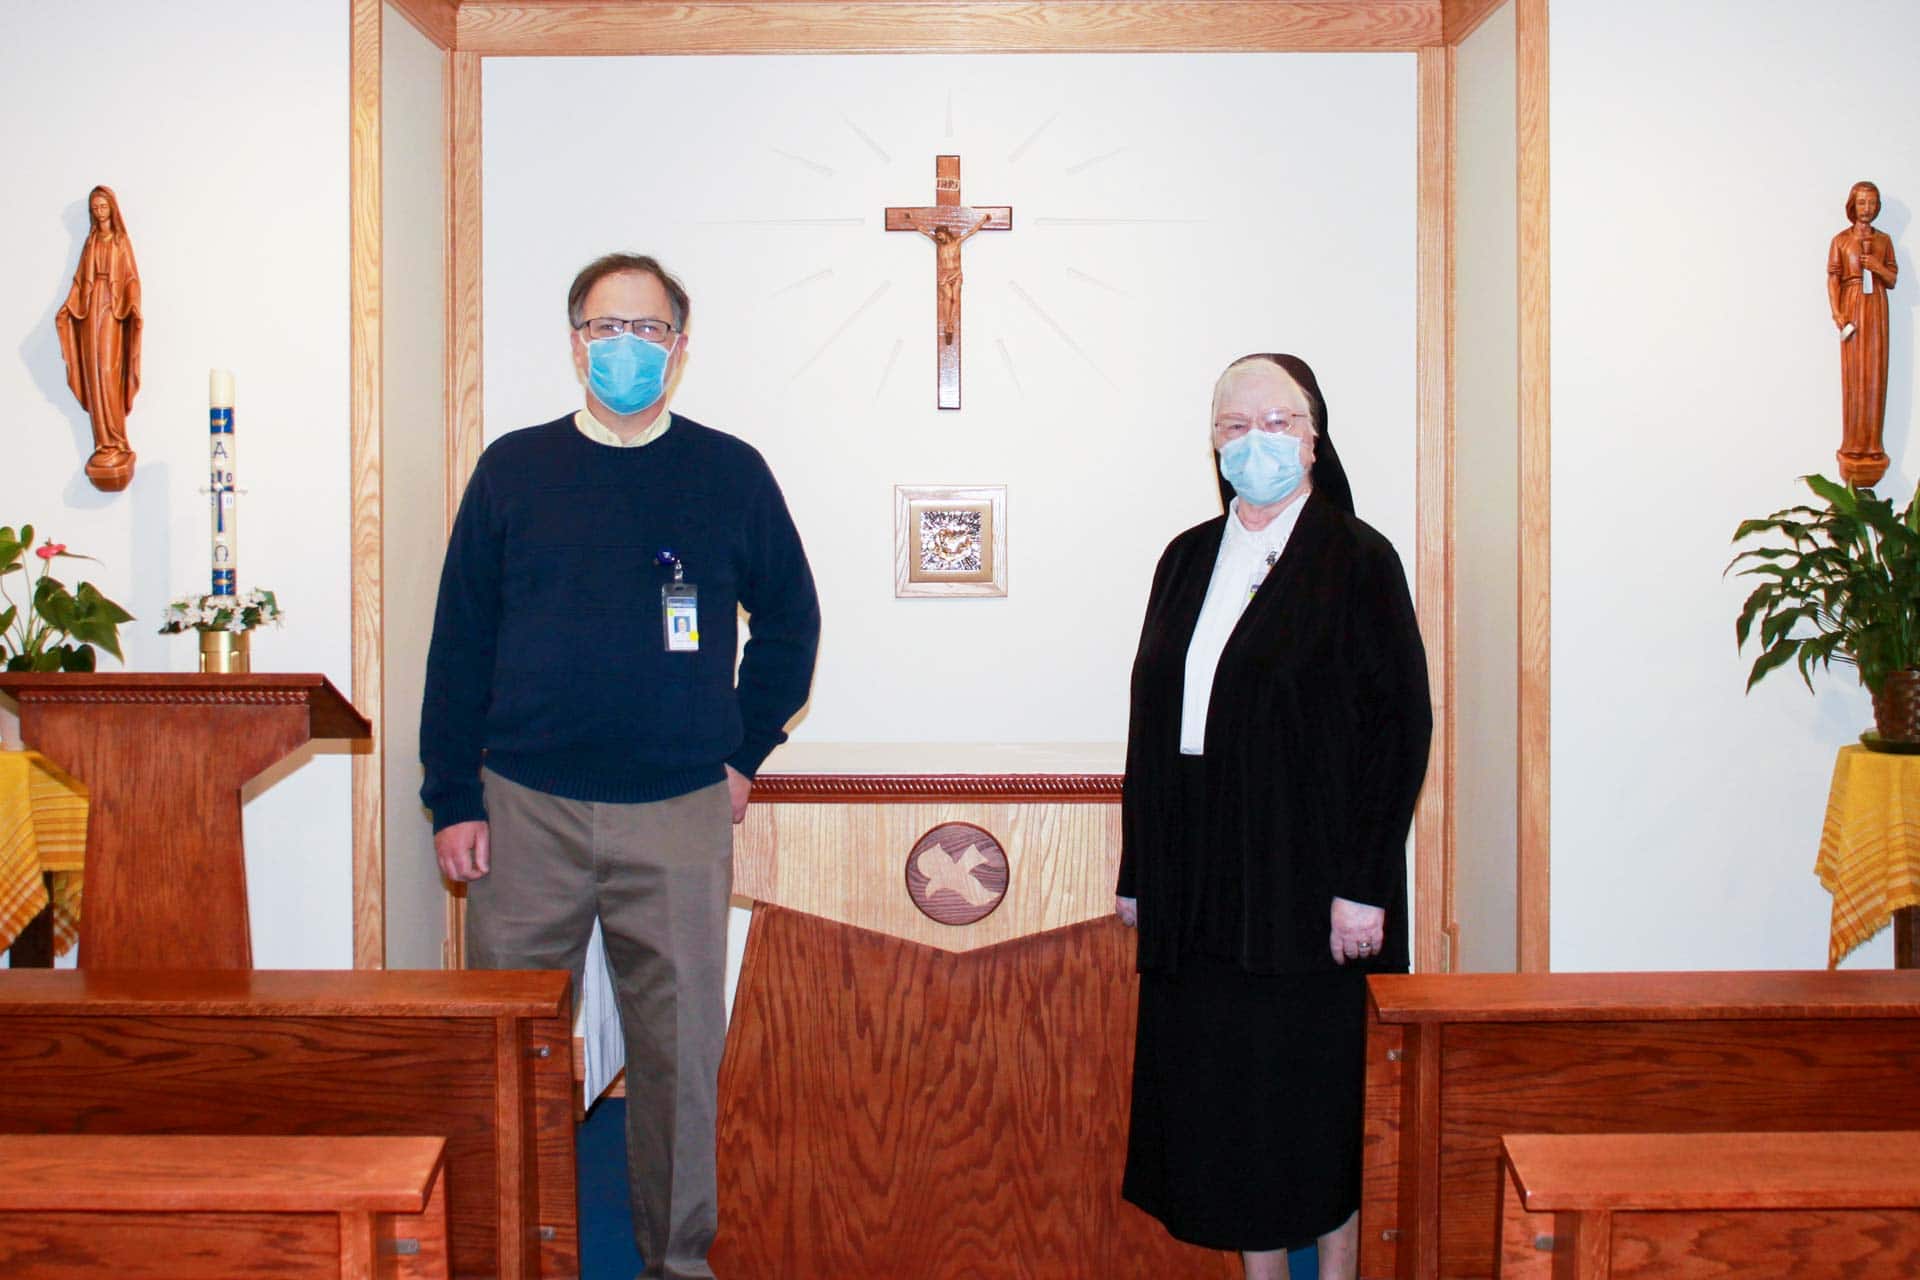 Hospital Chaplain Barry Moll and Sister Francesca Lowis, Vice President of Mission Integration, in the hospital’s chapel.